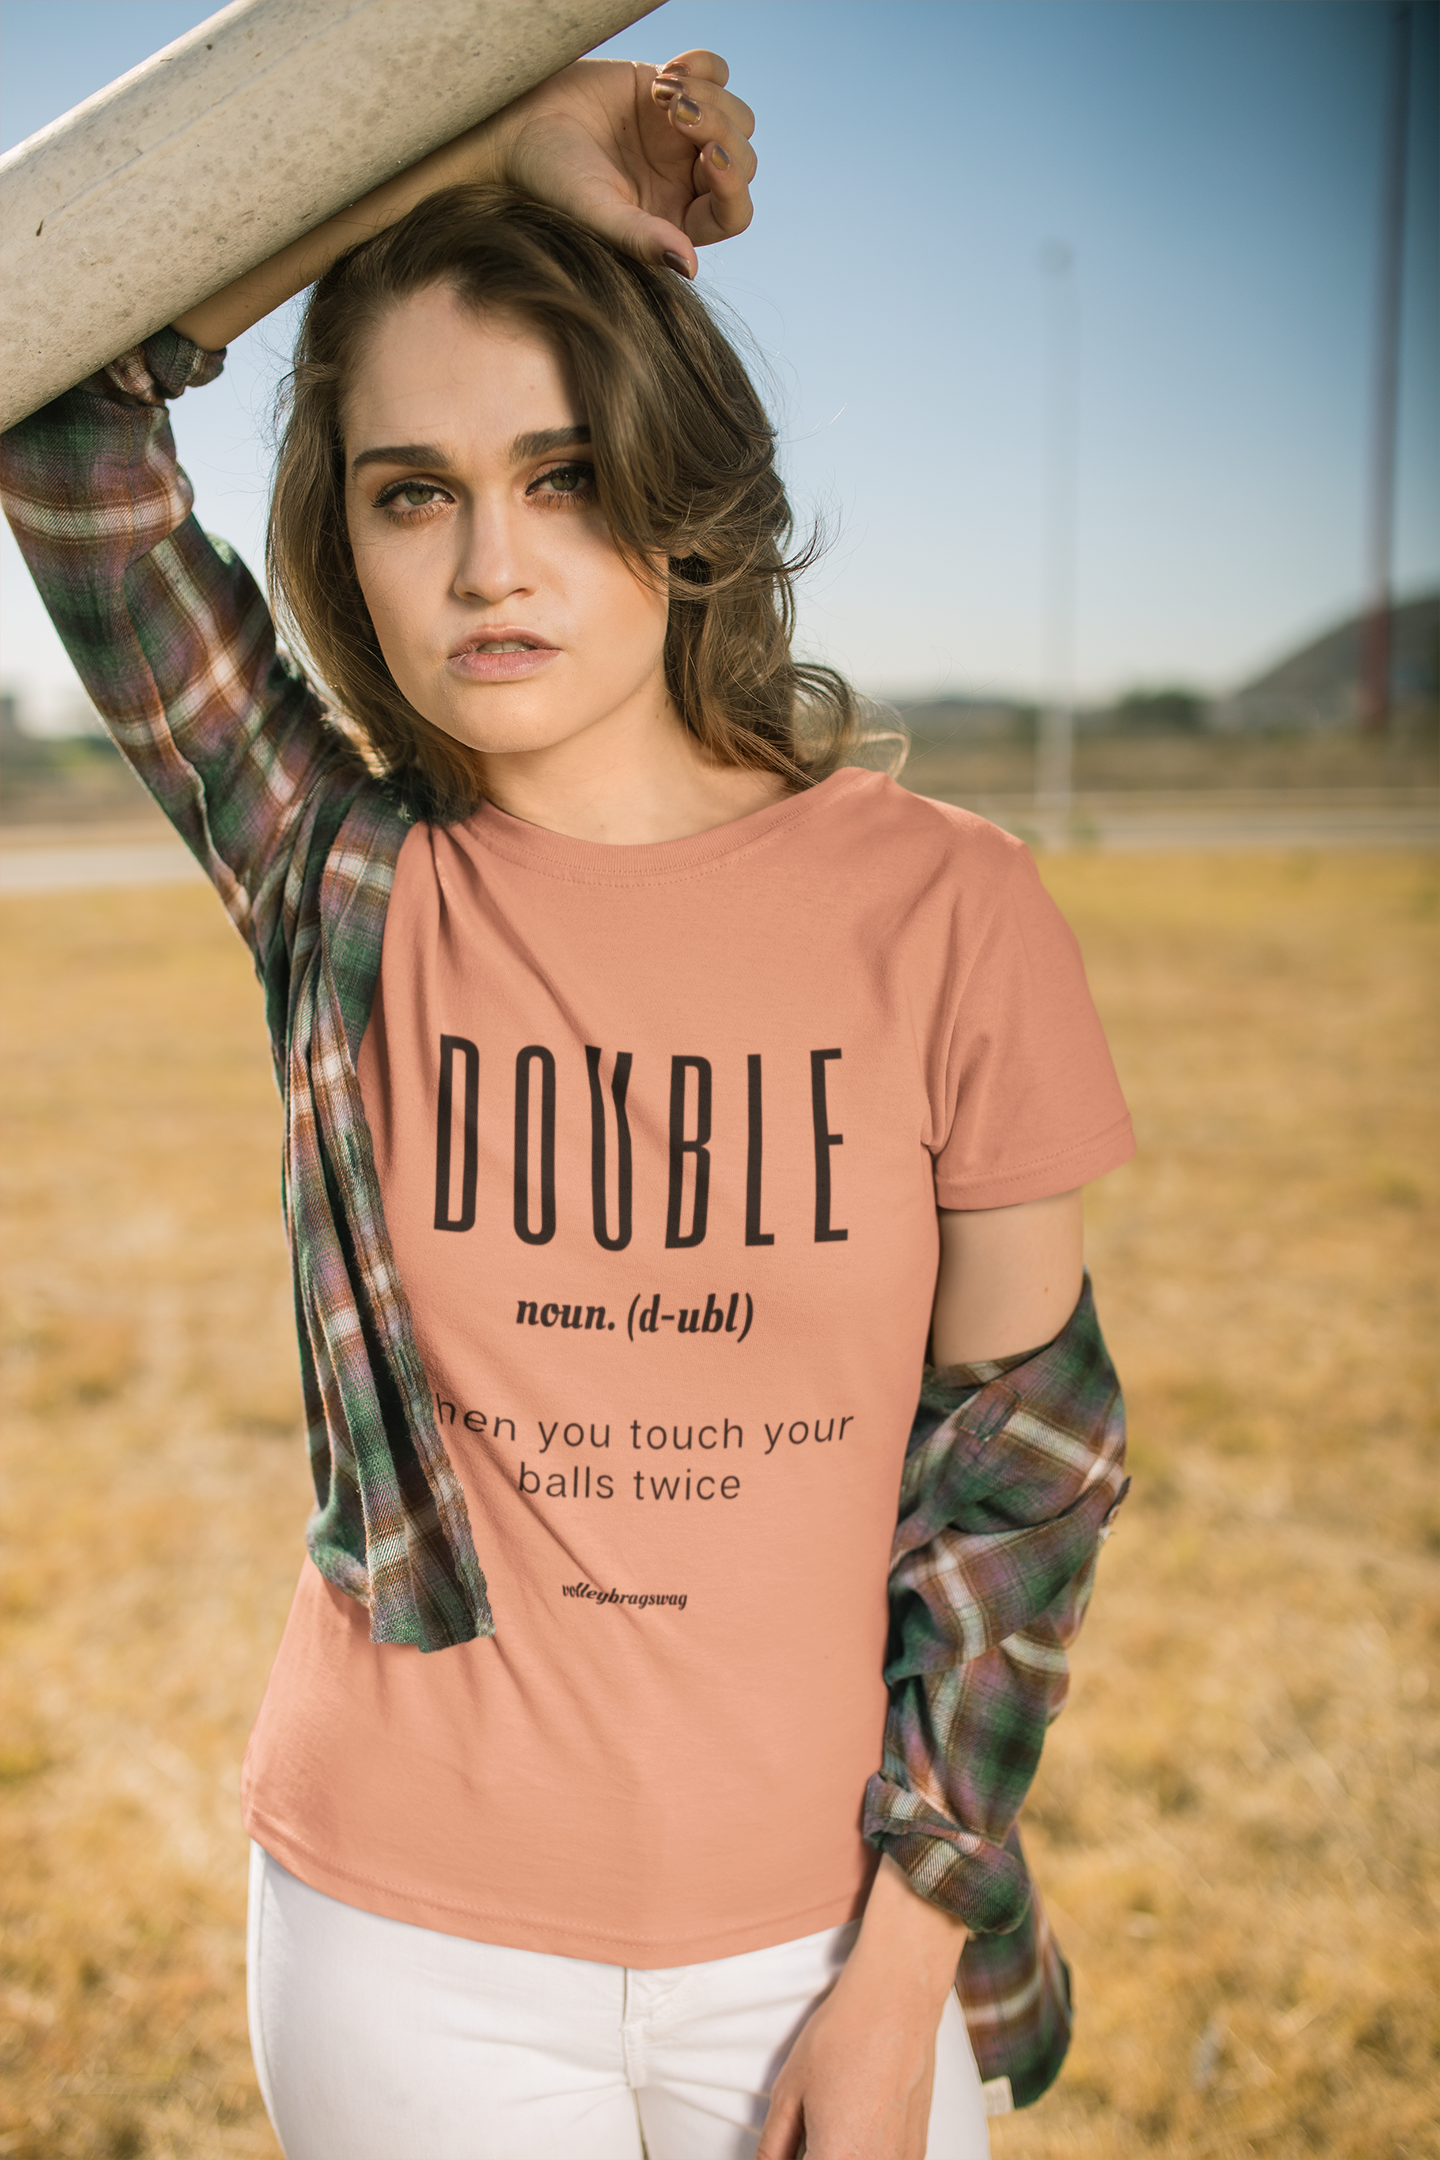 DOUBLE (noun) When You Touch Your Balls Twice volleyball shirt. April Chapple, Launches a Hilarious Volleyball T-shirt Line With Fun Tongue-in-Cheek Designs sure to make players and enthusiasts laugh.